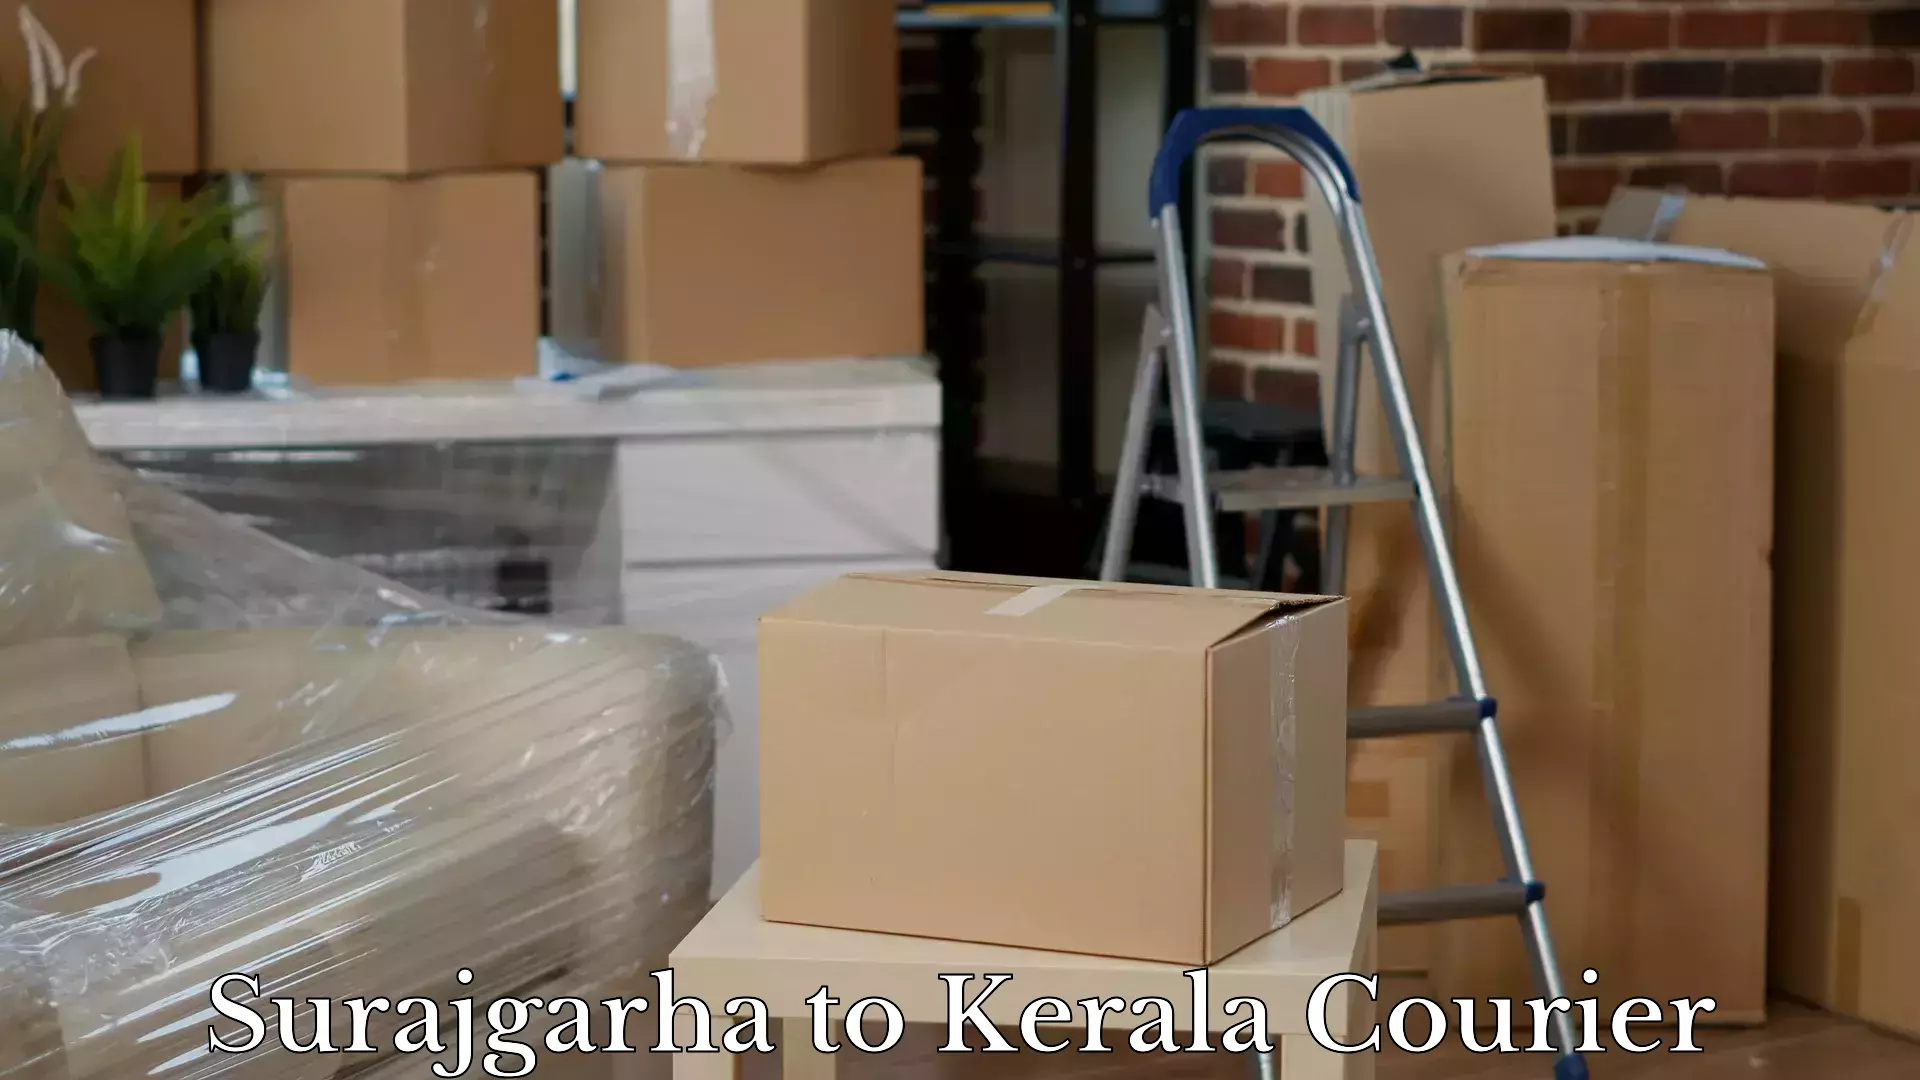 Baggage transport network Surajgarha to Cochin University of Science and Technology